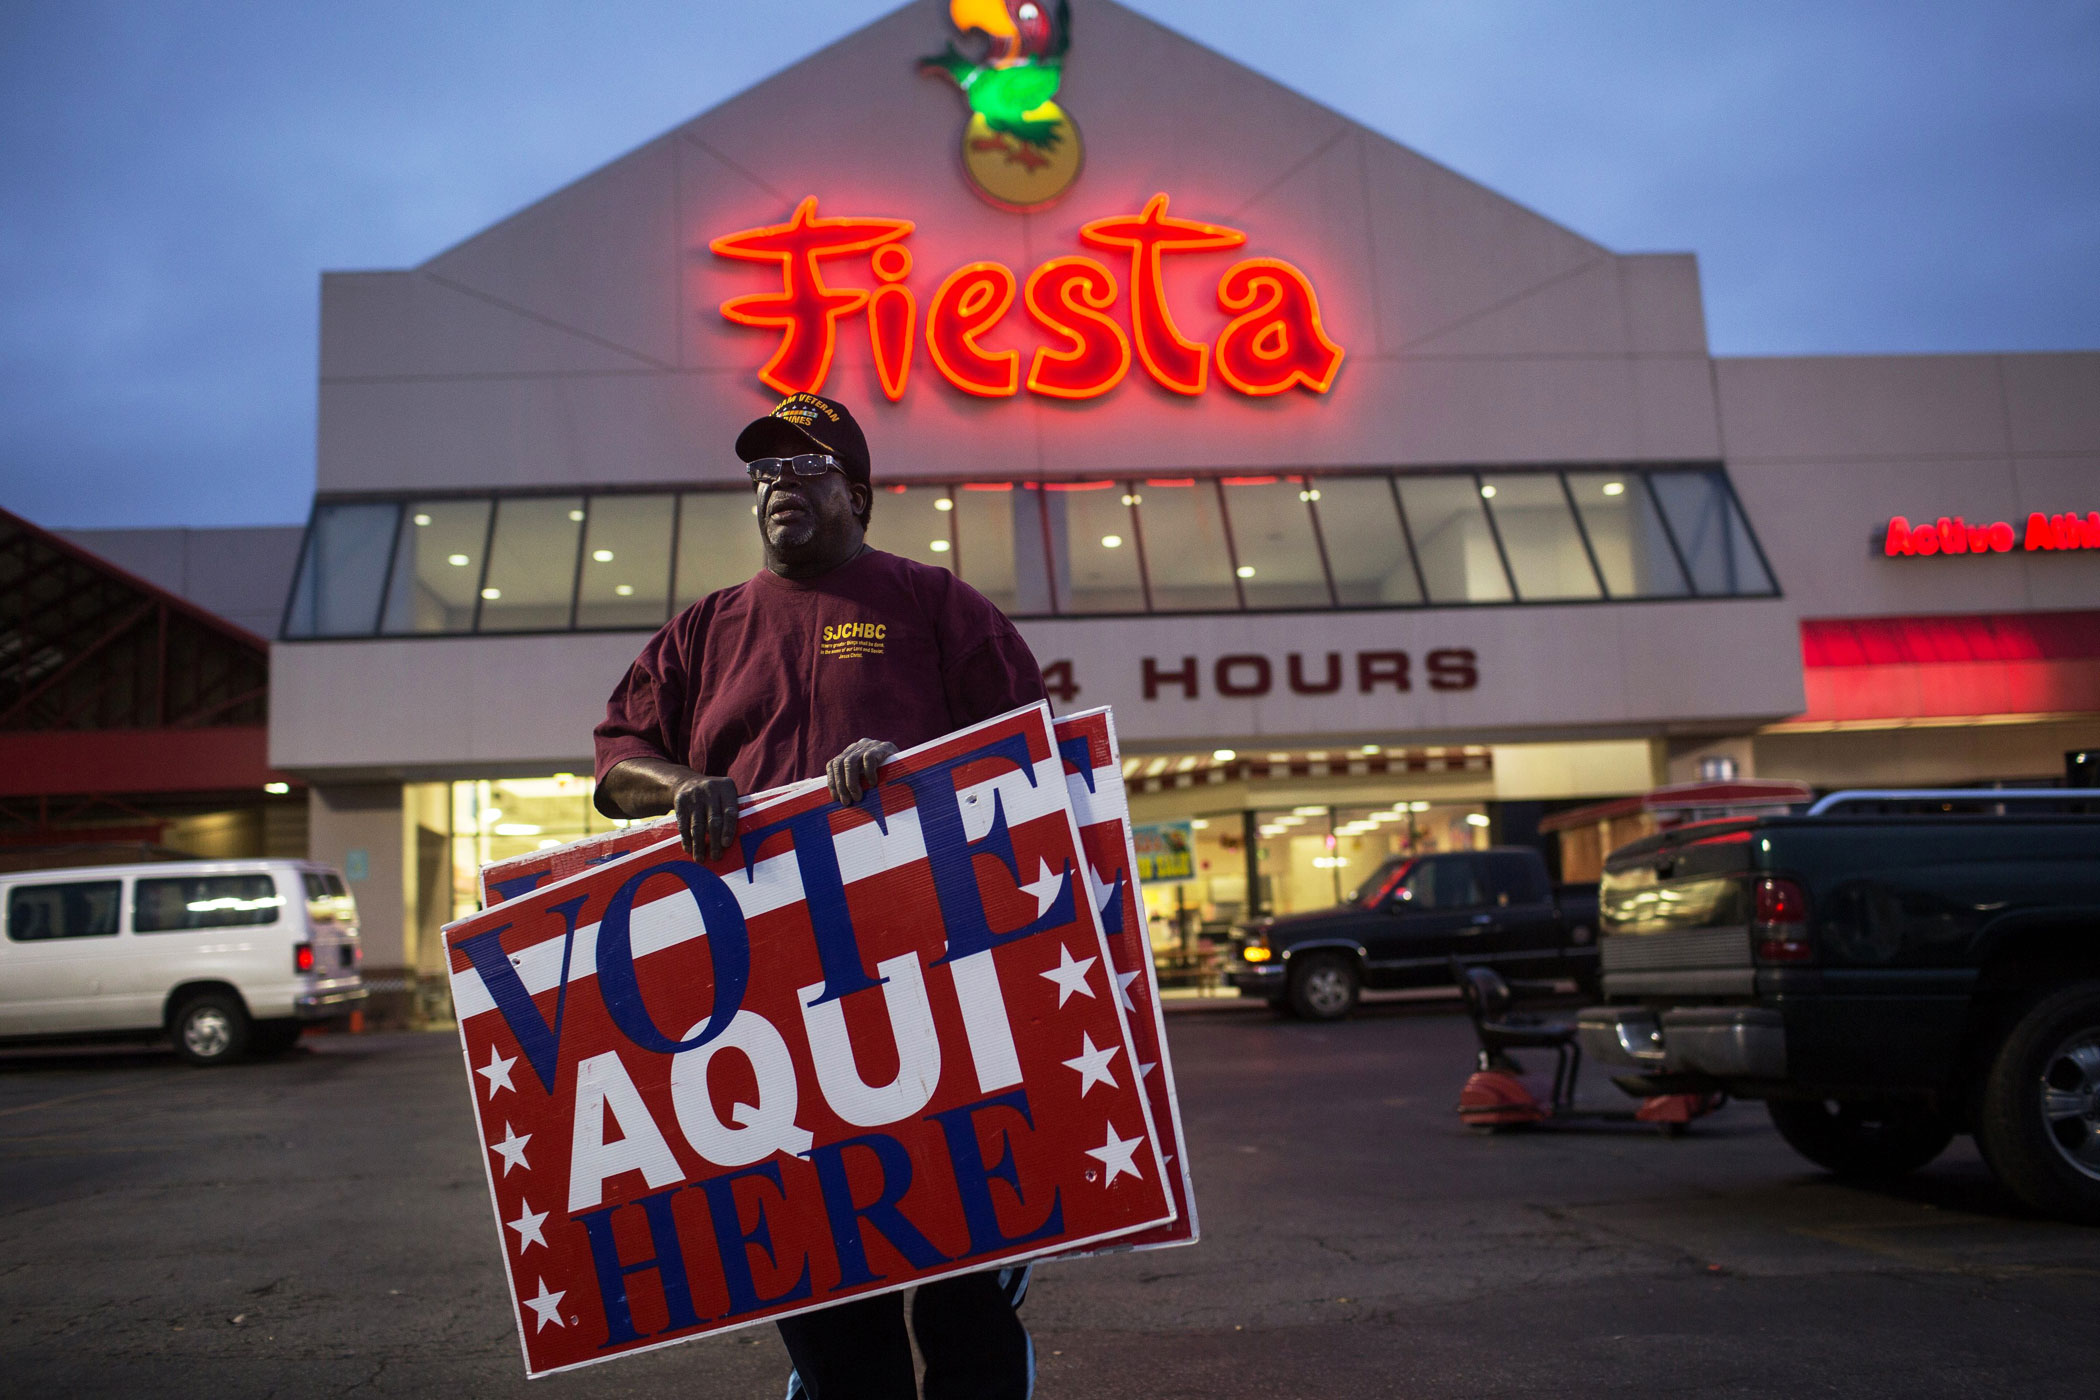 Volunteer election clerk Allie Green Jr. searches for places to post voting signs outside of supermarket polling location in Austin, Texas on Tuesday.